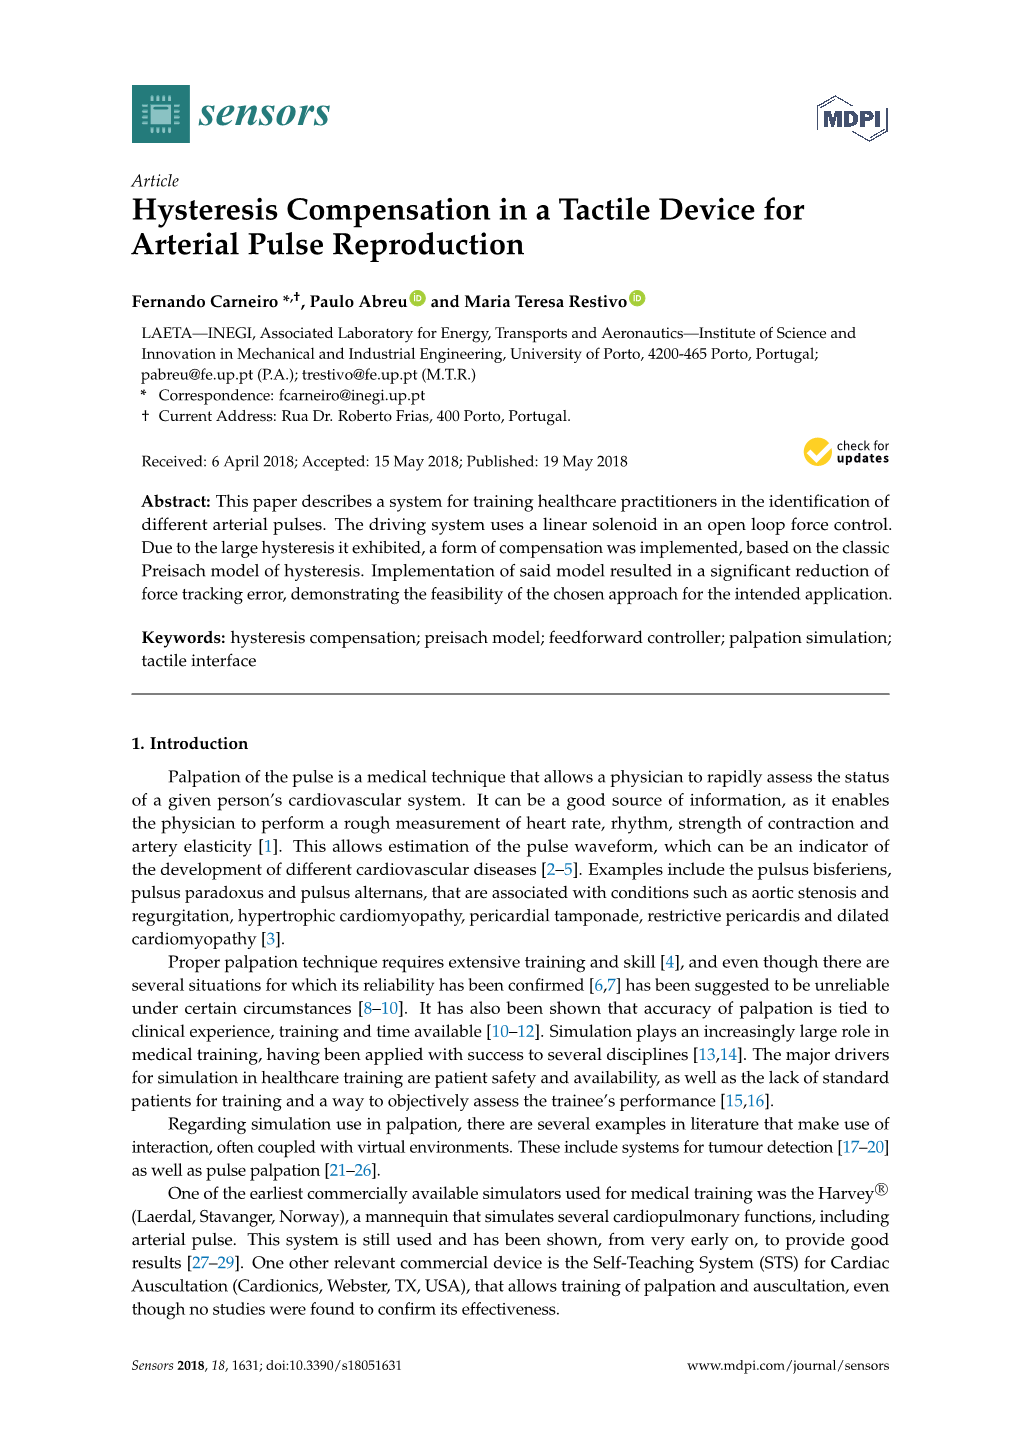 Hysteresis Compensation in a Tactile Device for Arterial Pulse Reproduction